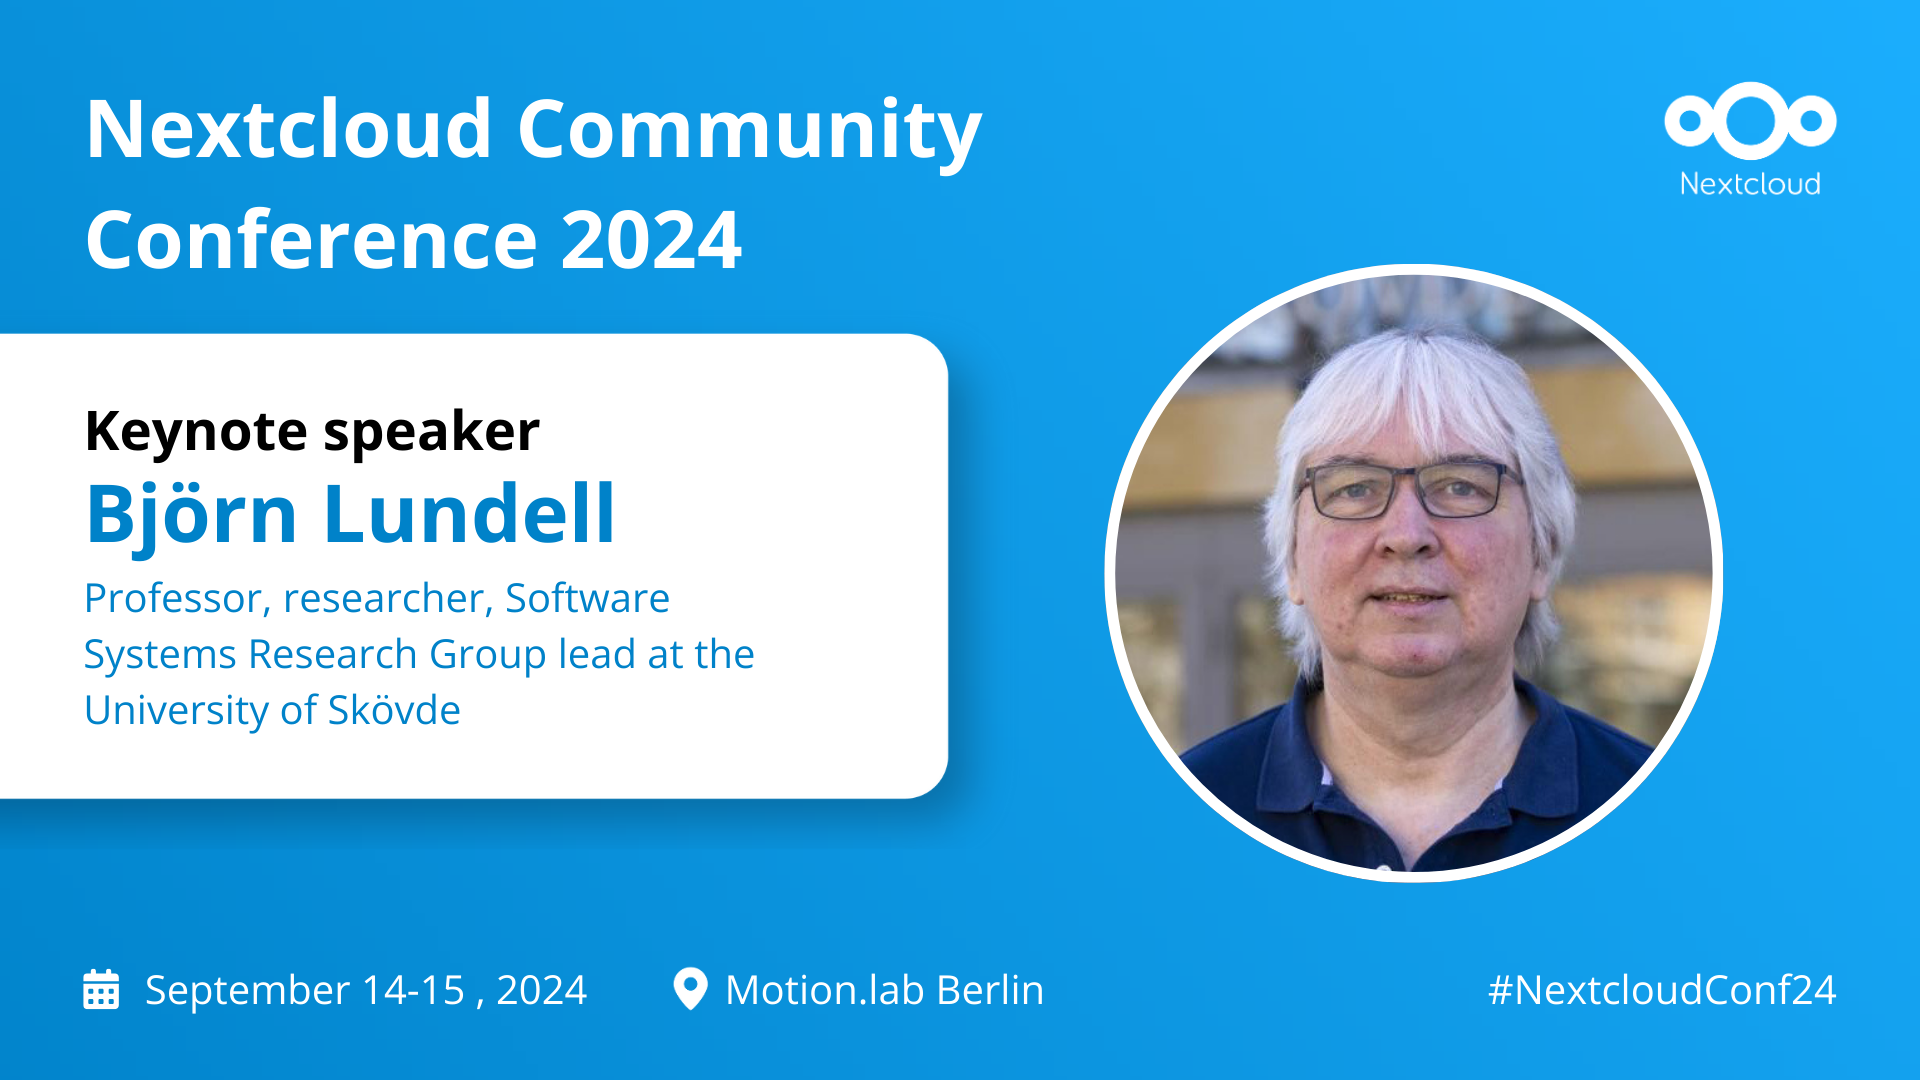 Speaking at Nextcloud Community Conference 2024 Björn Lundell